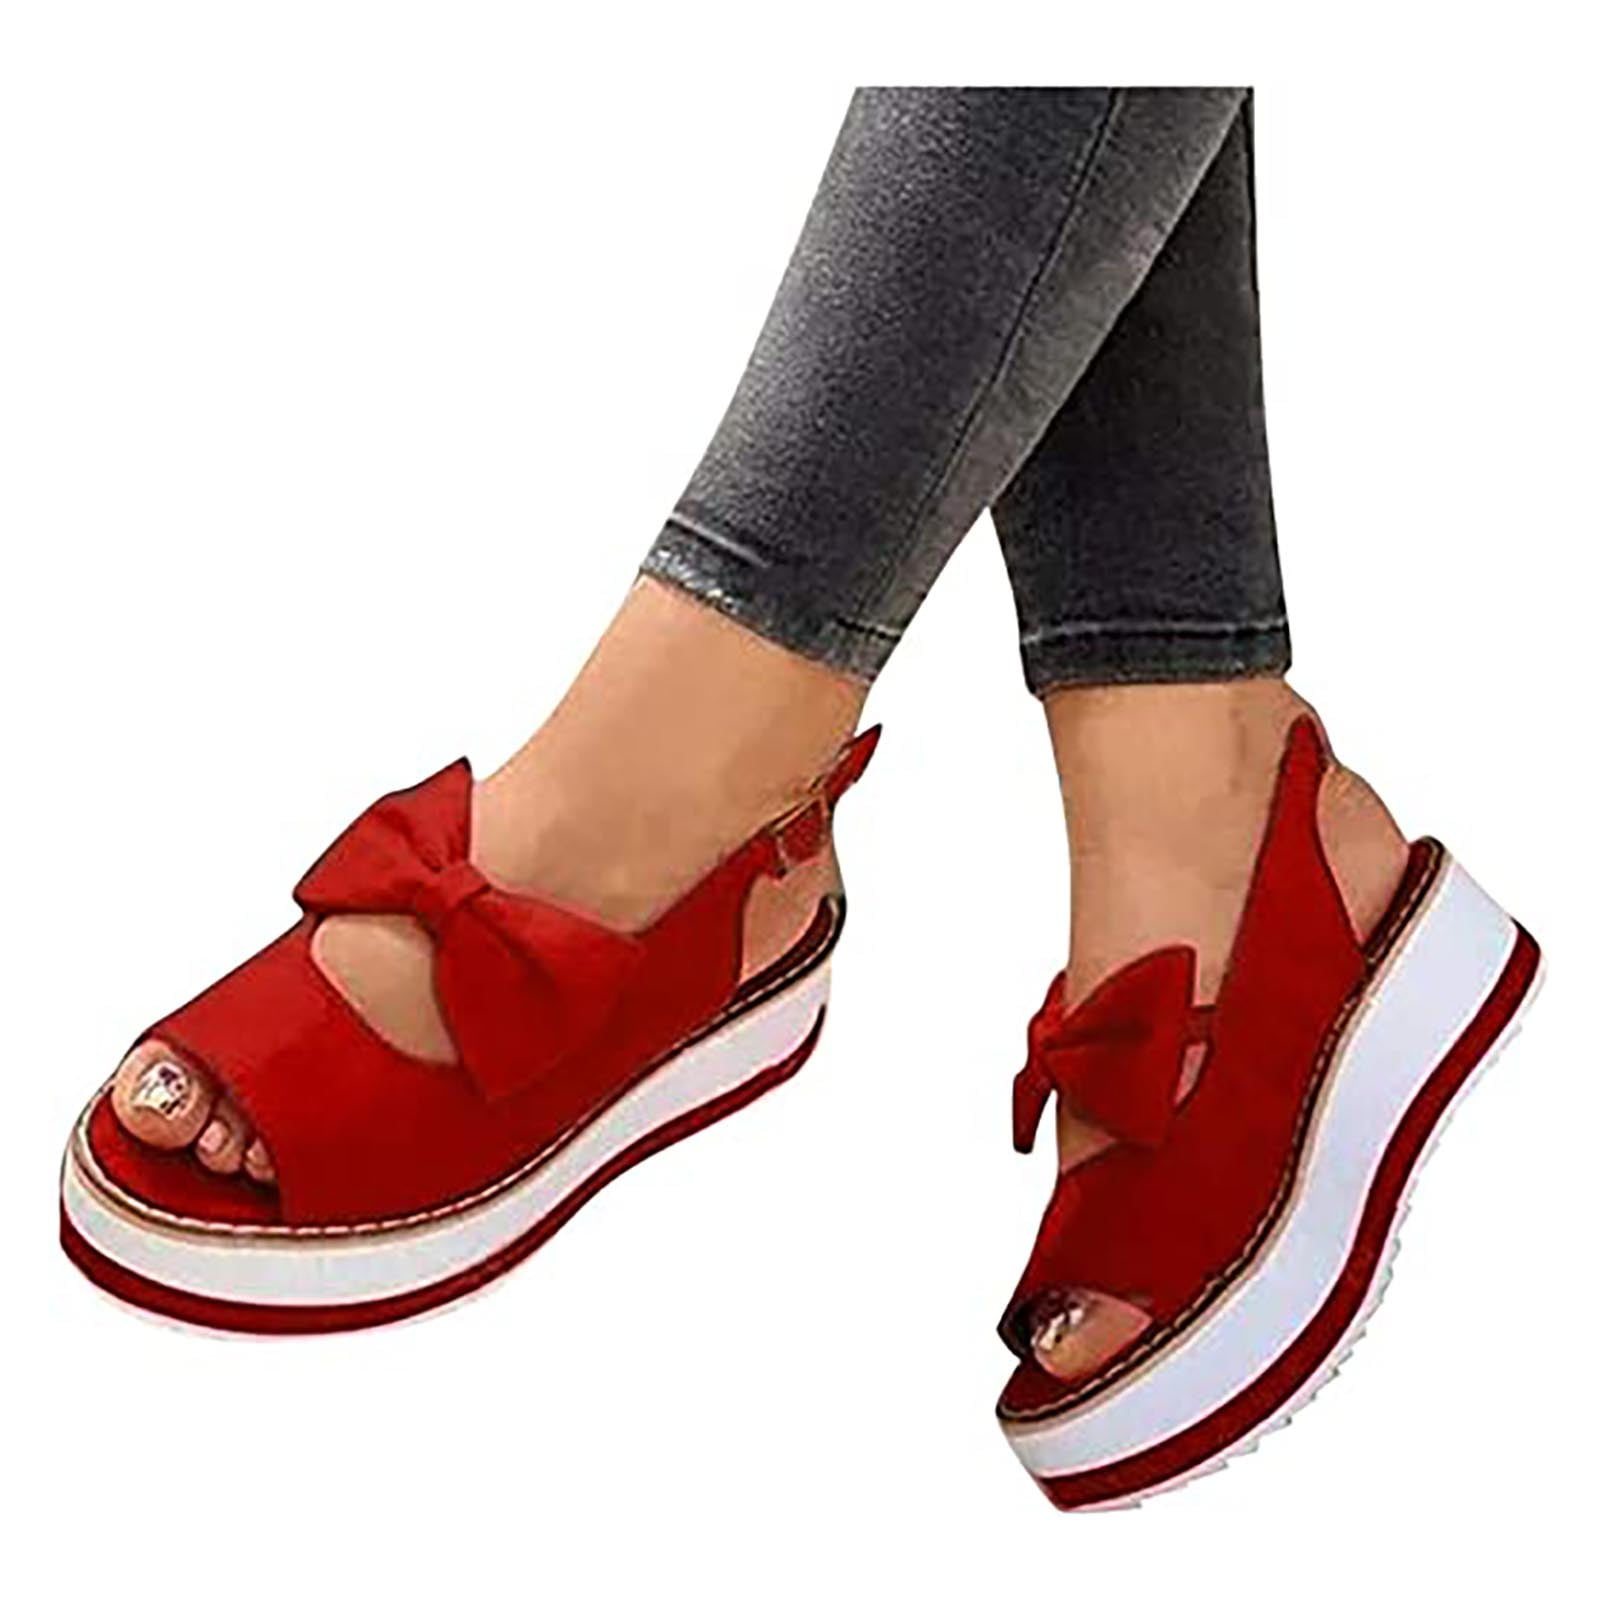 Womens Fish Mouth Lazy Shoes Thick Bottom Casual Dress Platform Pump Sandals